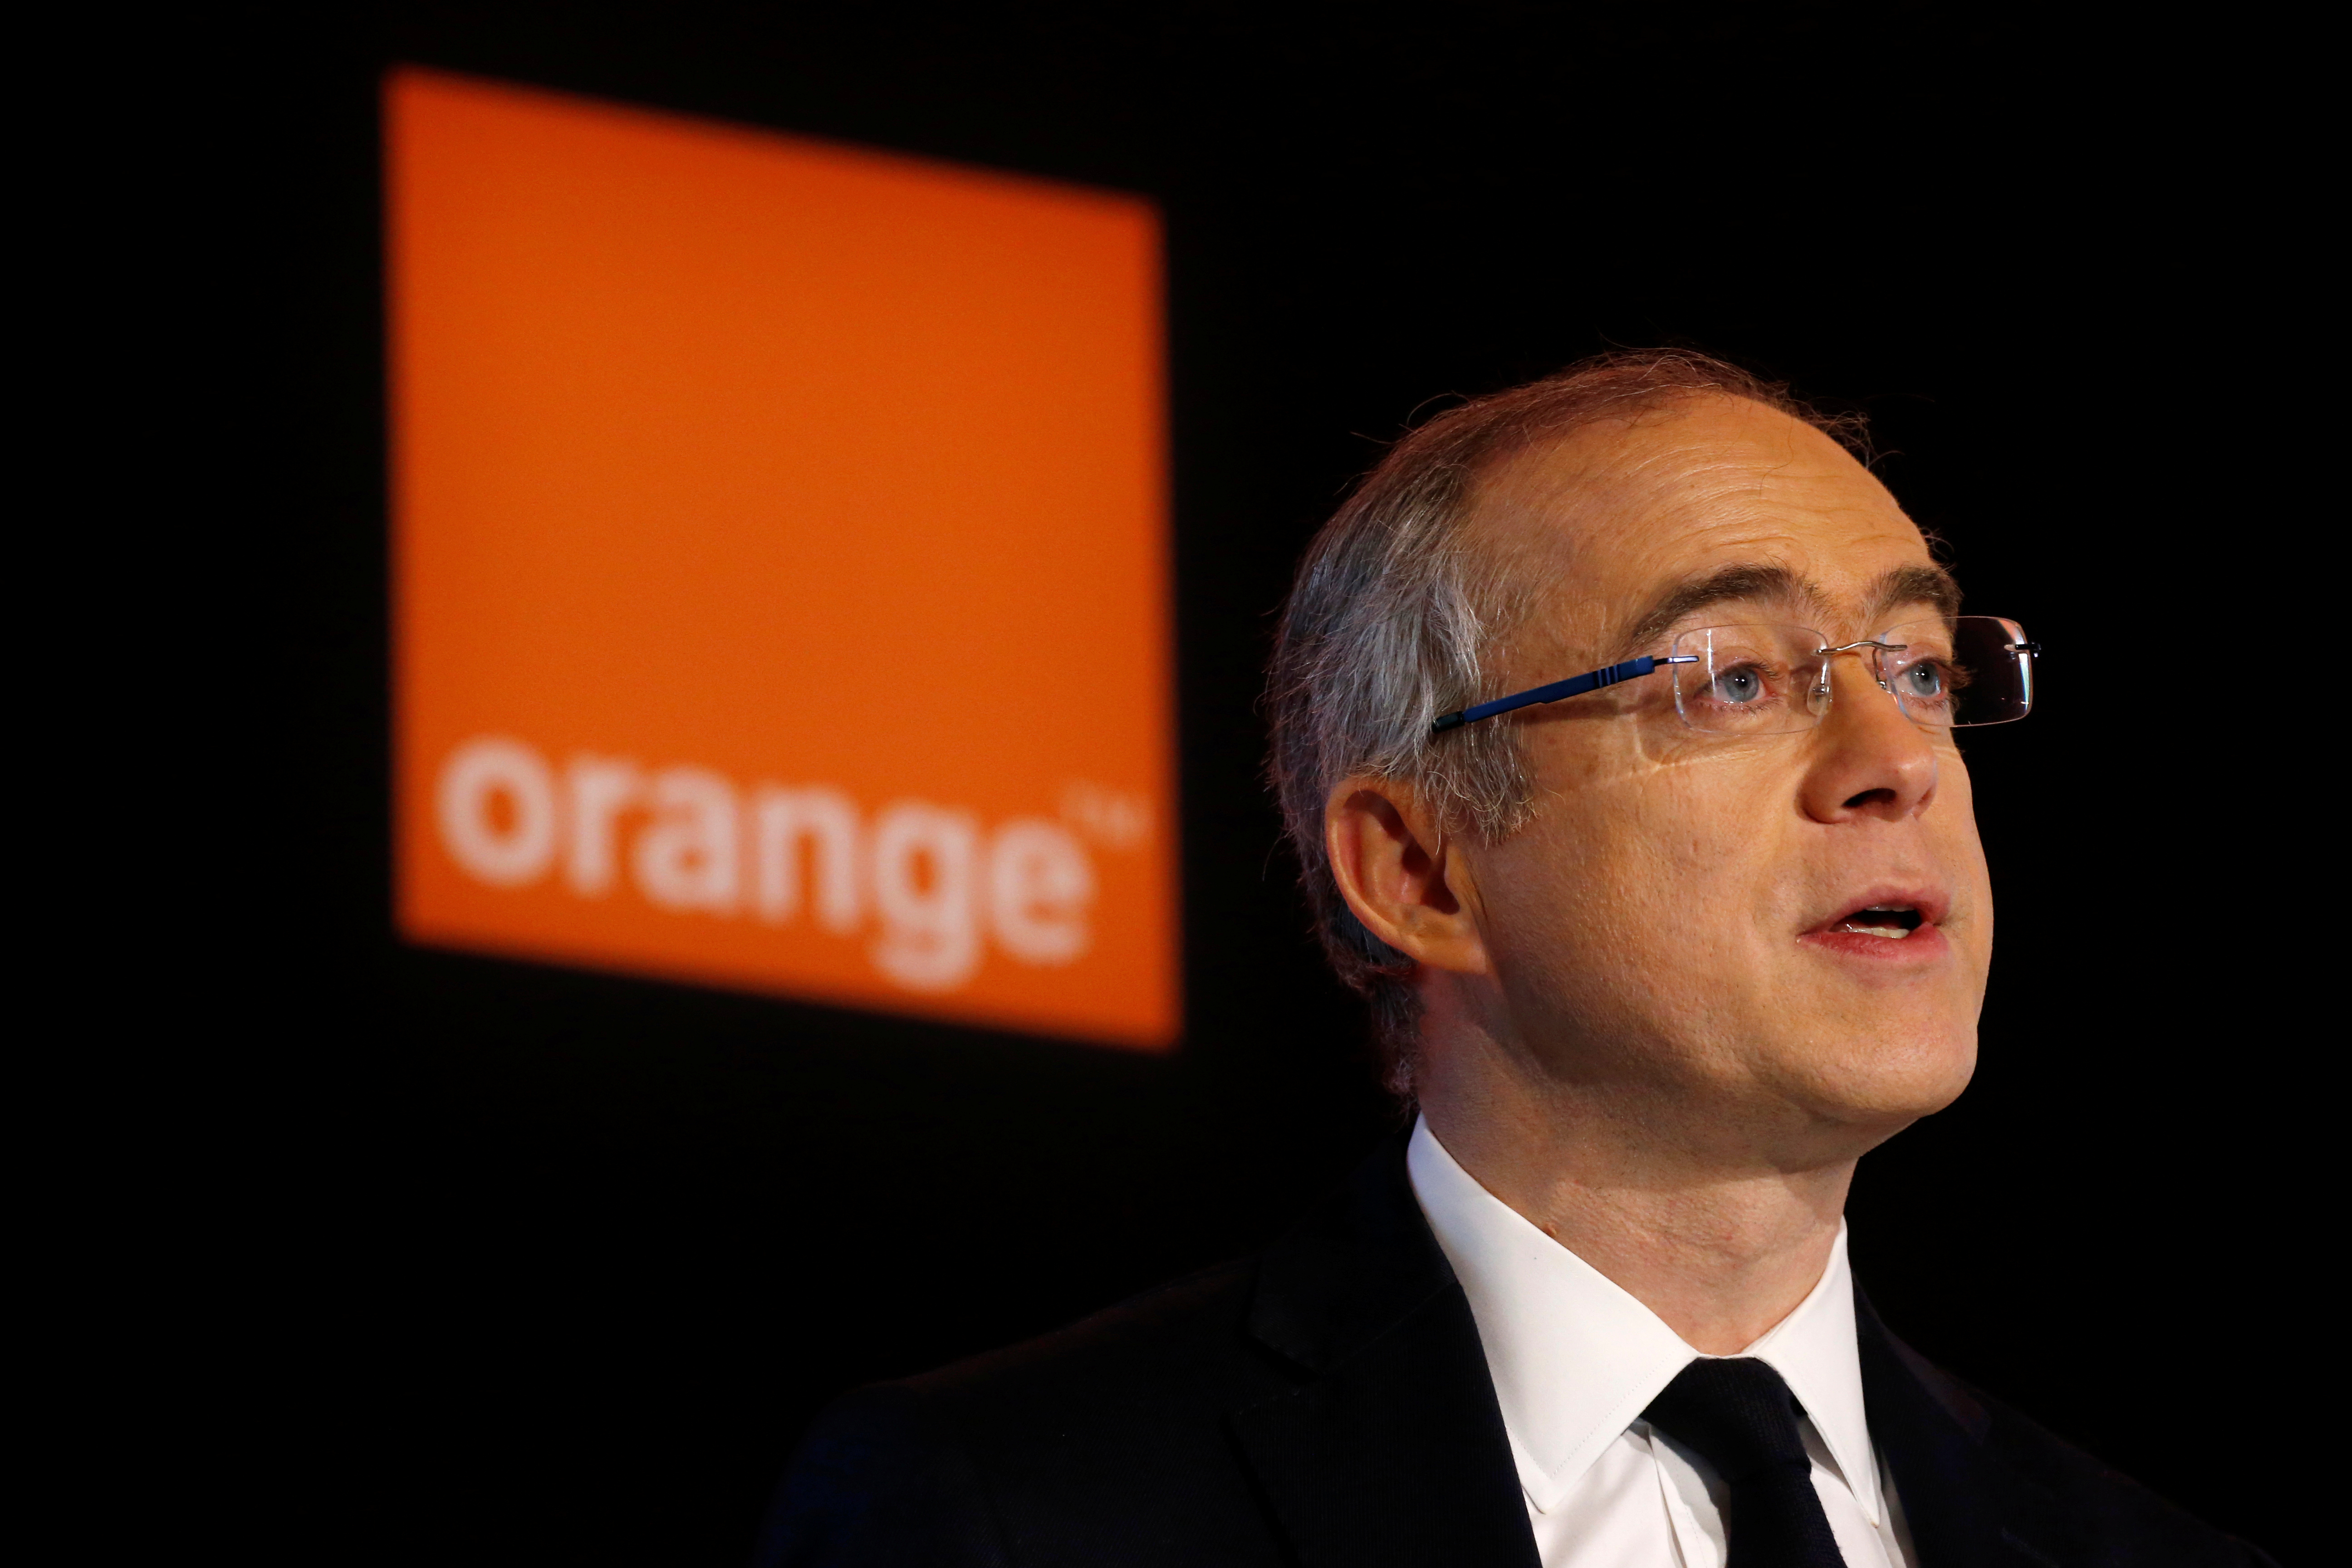 French telecom operator Orange Delegate Chief Executive Officer in charge of Group finance and strategy, Ramon Fernandez speaks during a news conference to present the company's 2017 annual results in Paris